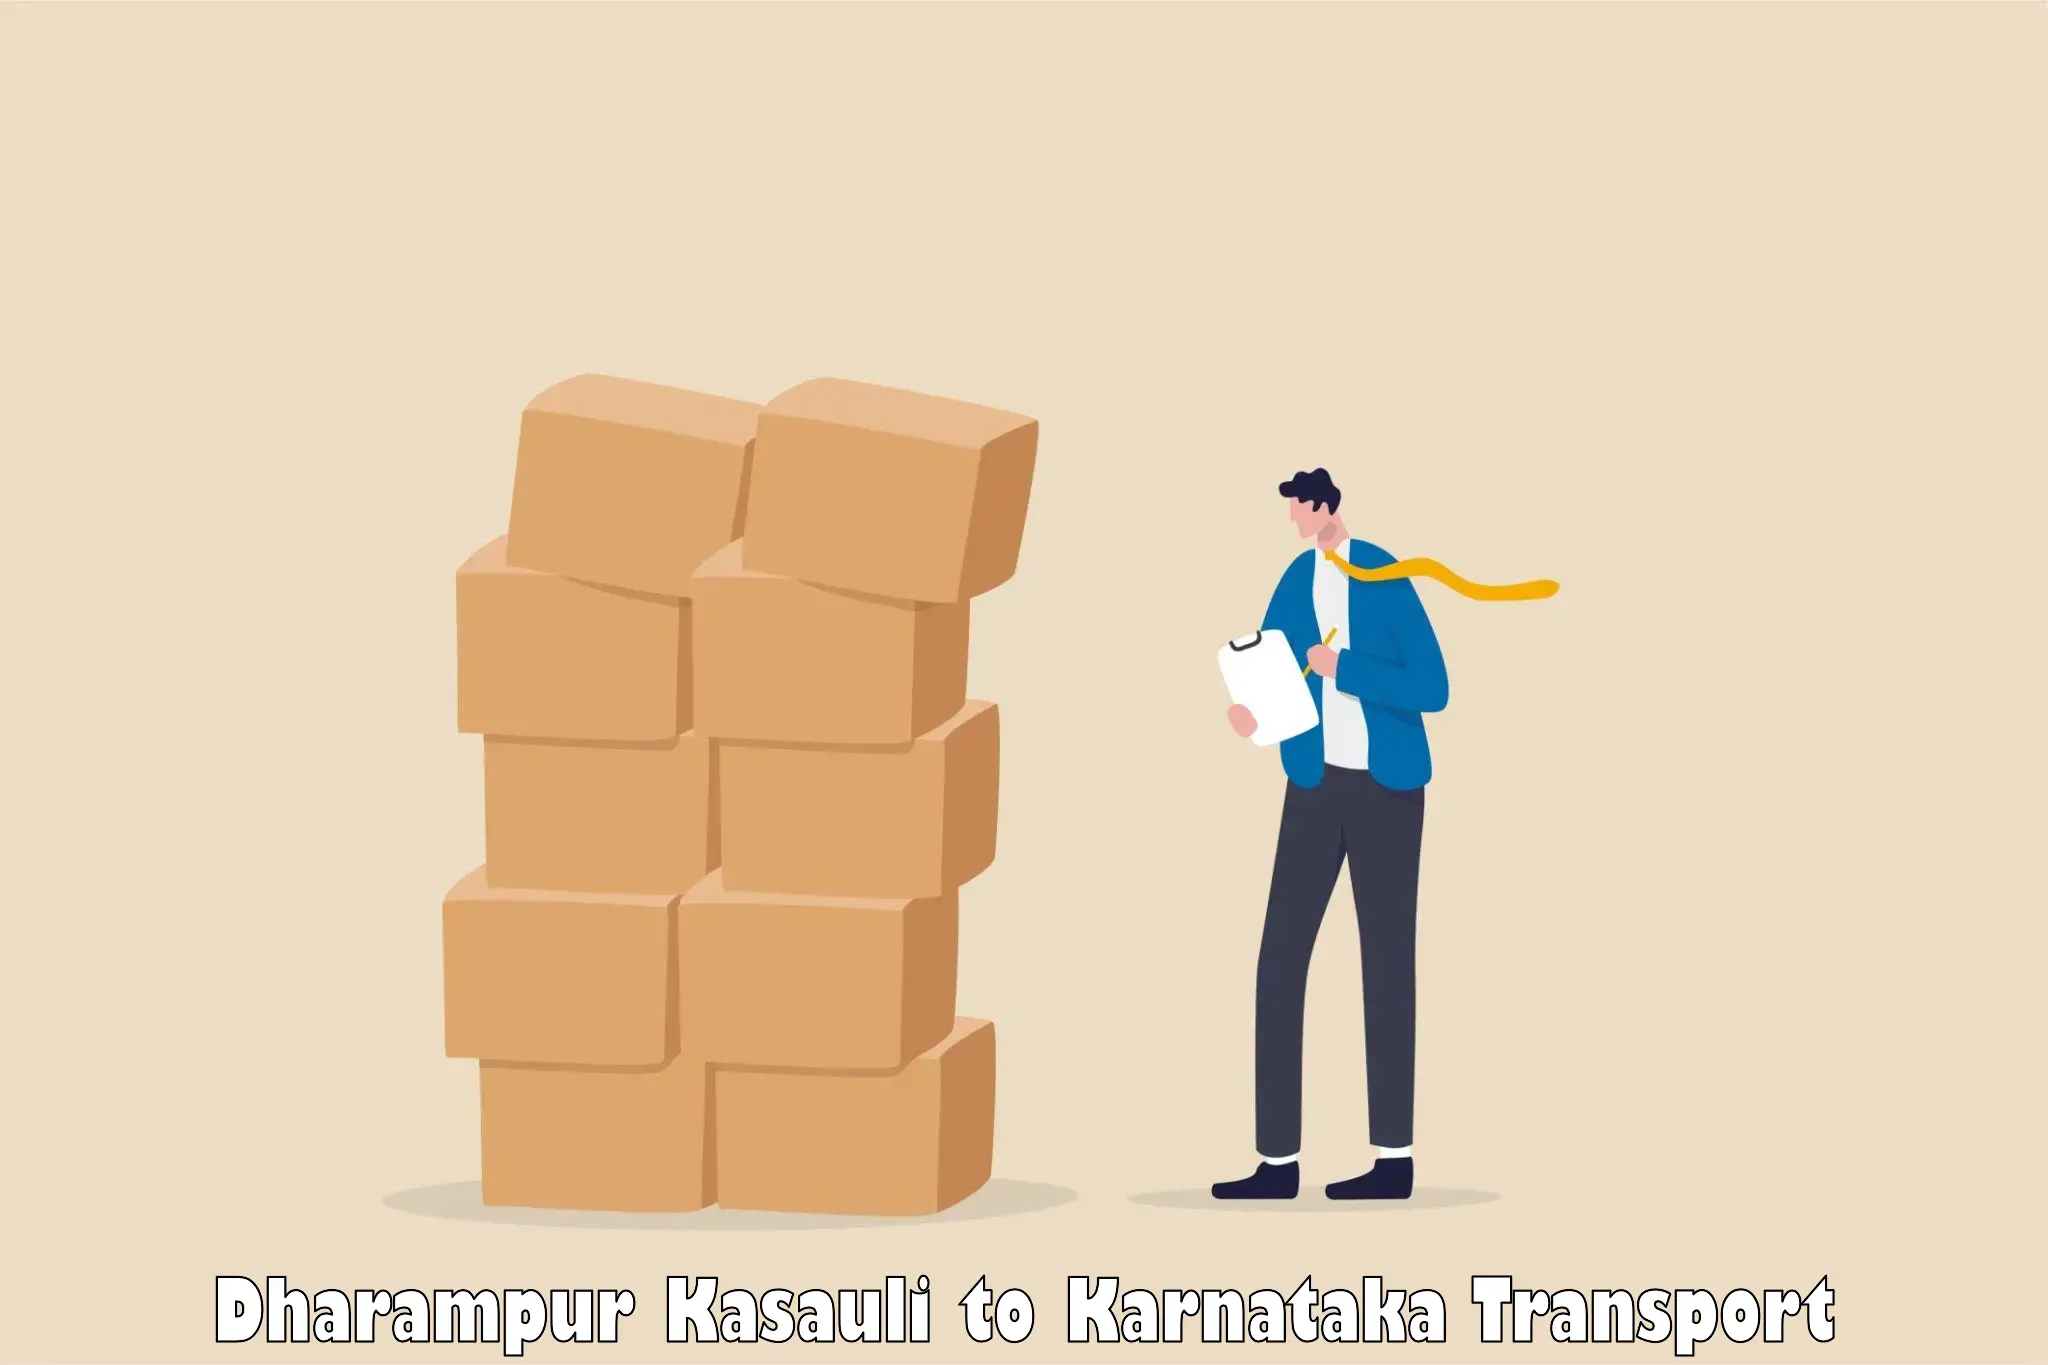 Daily transport service in Dharampur Kasauli to Mangalore